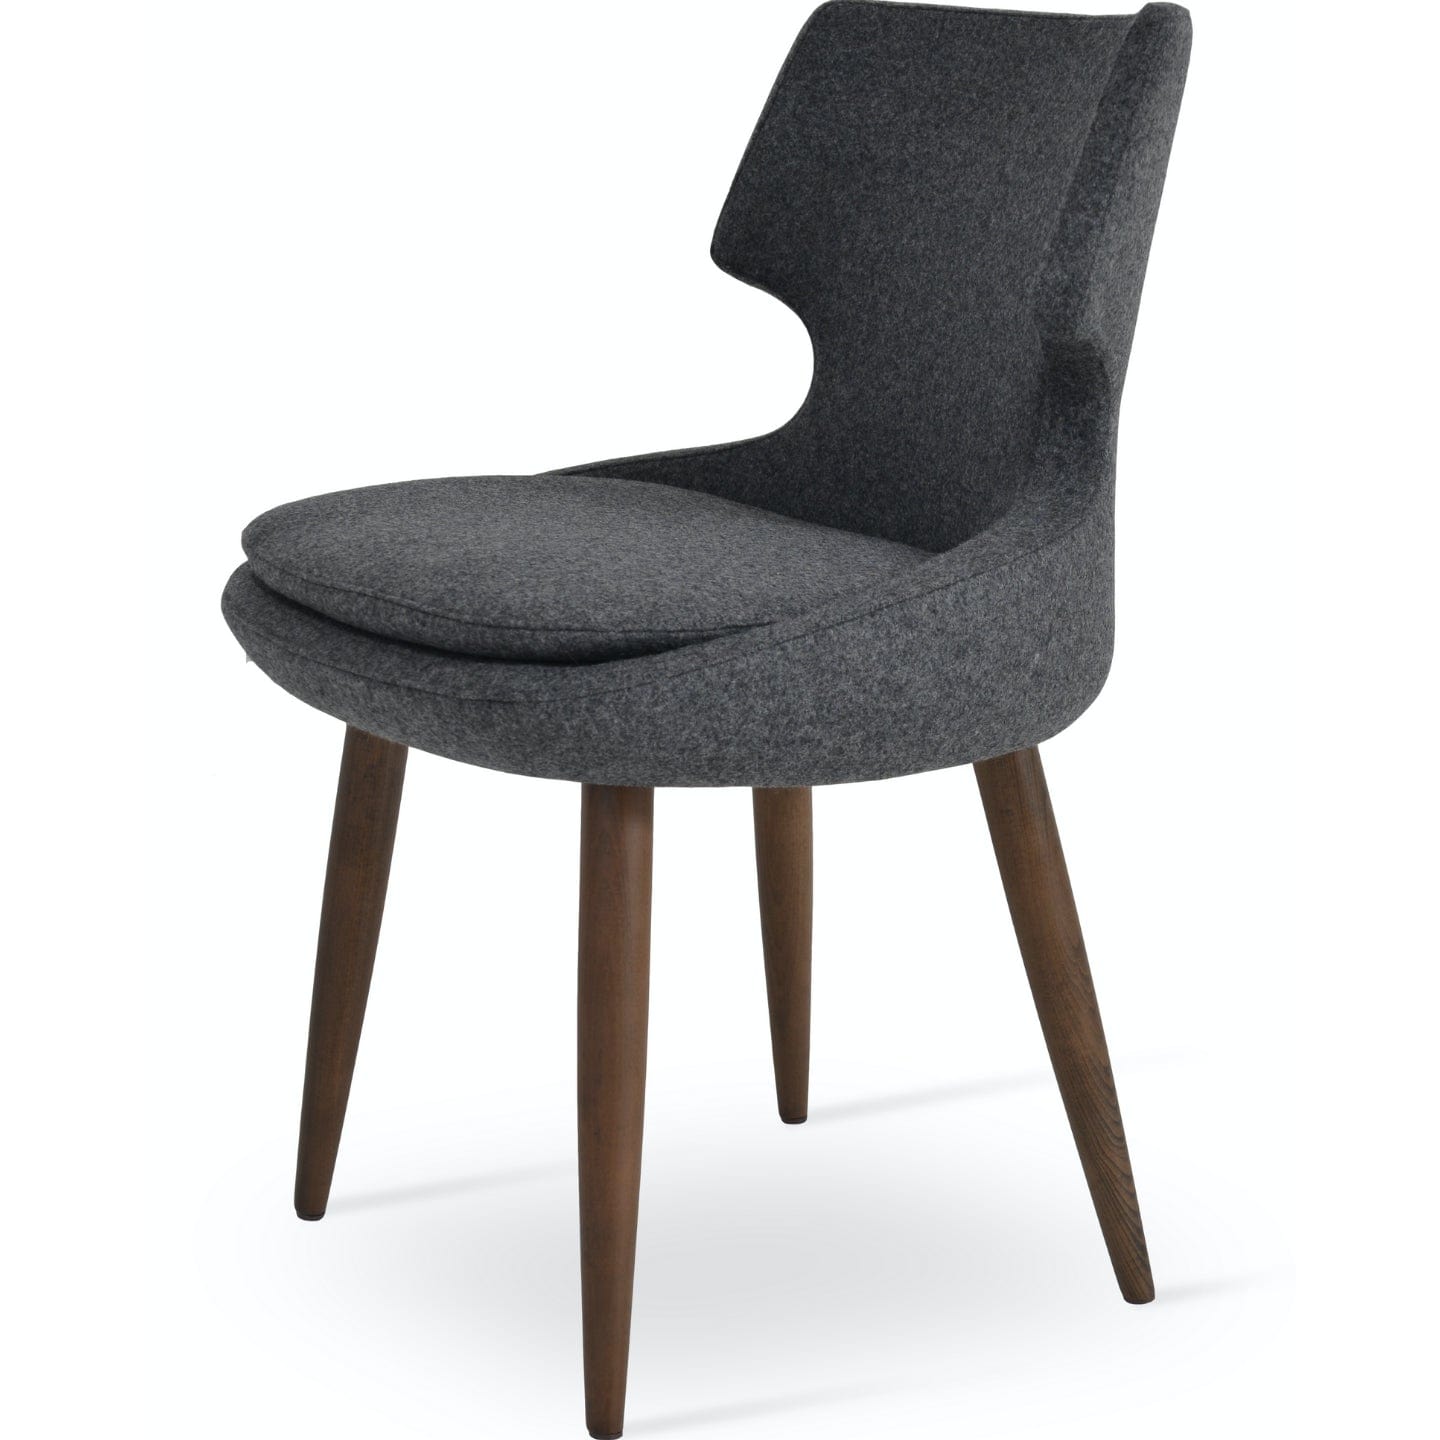 Patara Wood Dark Grey Leather Dining Chairs - Your BarStools Canada